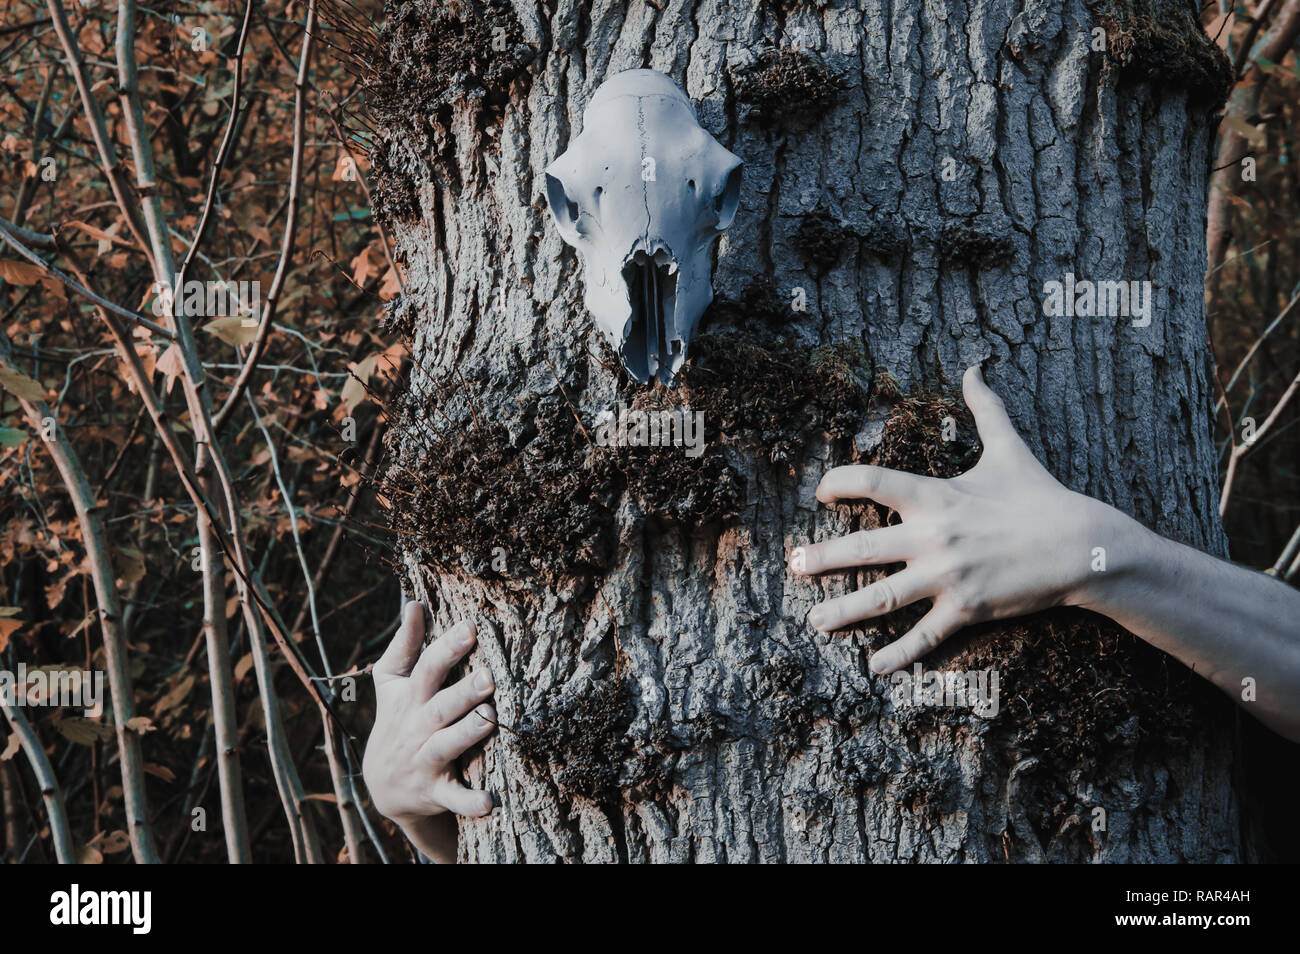 Creepy hands on a tree with a skull hanging from the bark in woodland, with a muted edit. Stock Photo